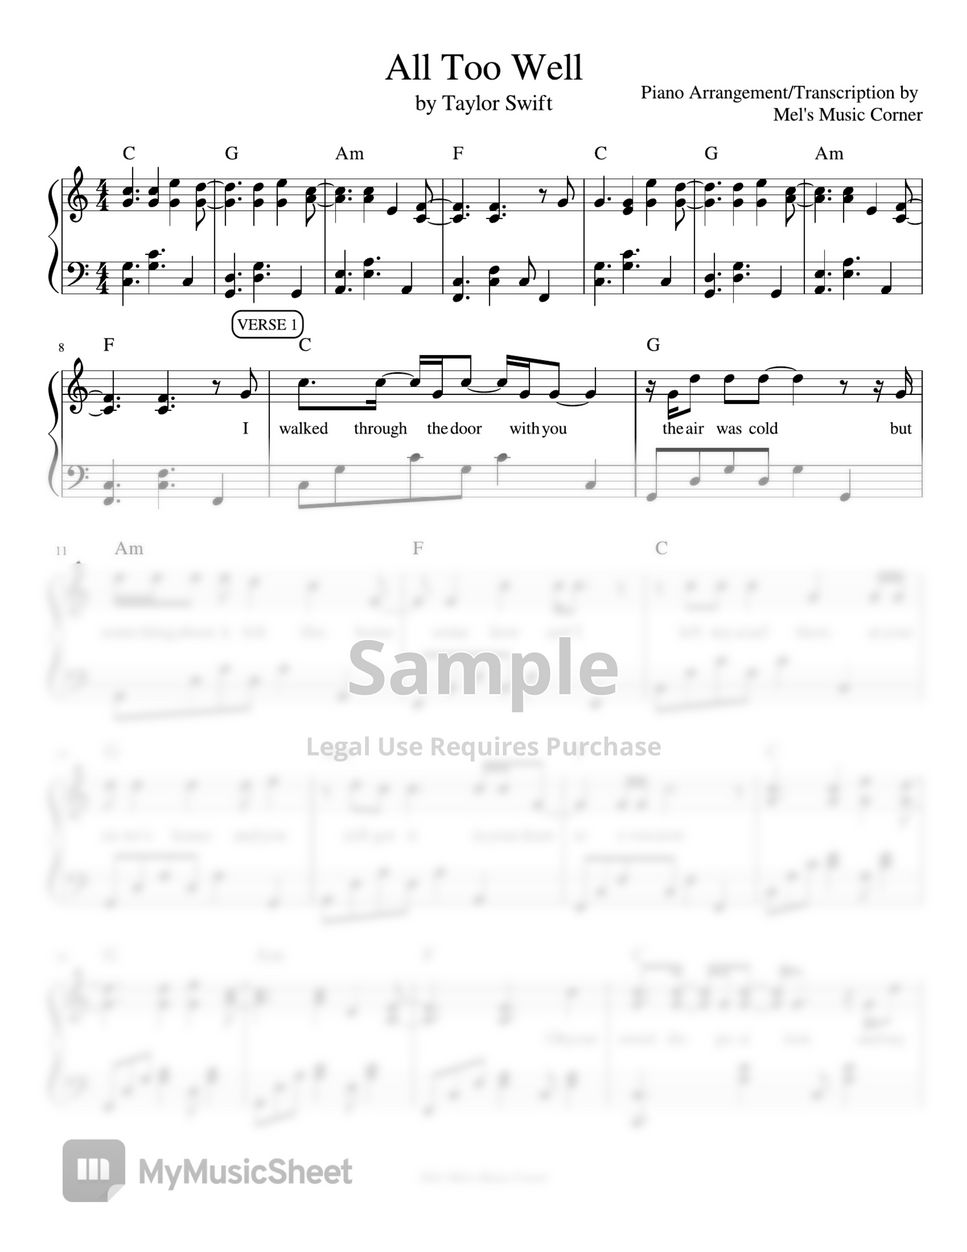 Taylor Swift - All Too Well (piano sheet music) by Mel's Music Corner